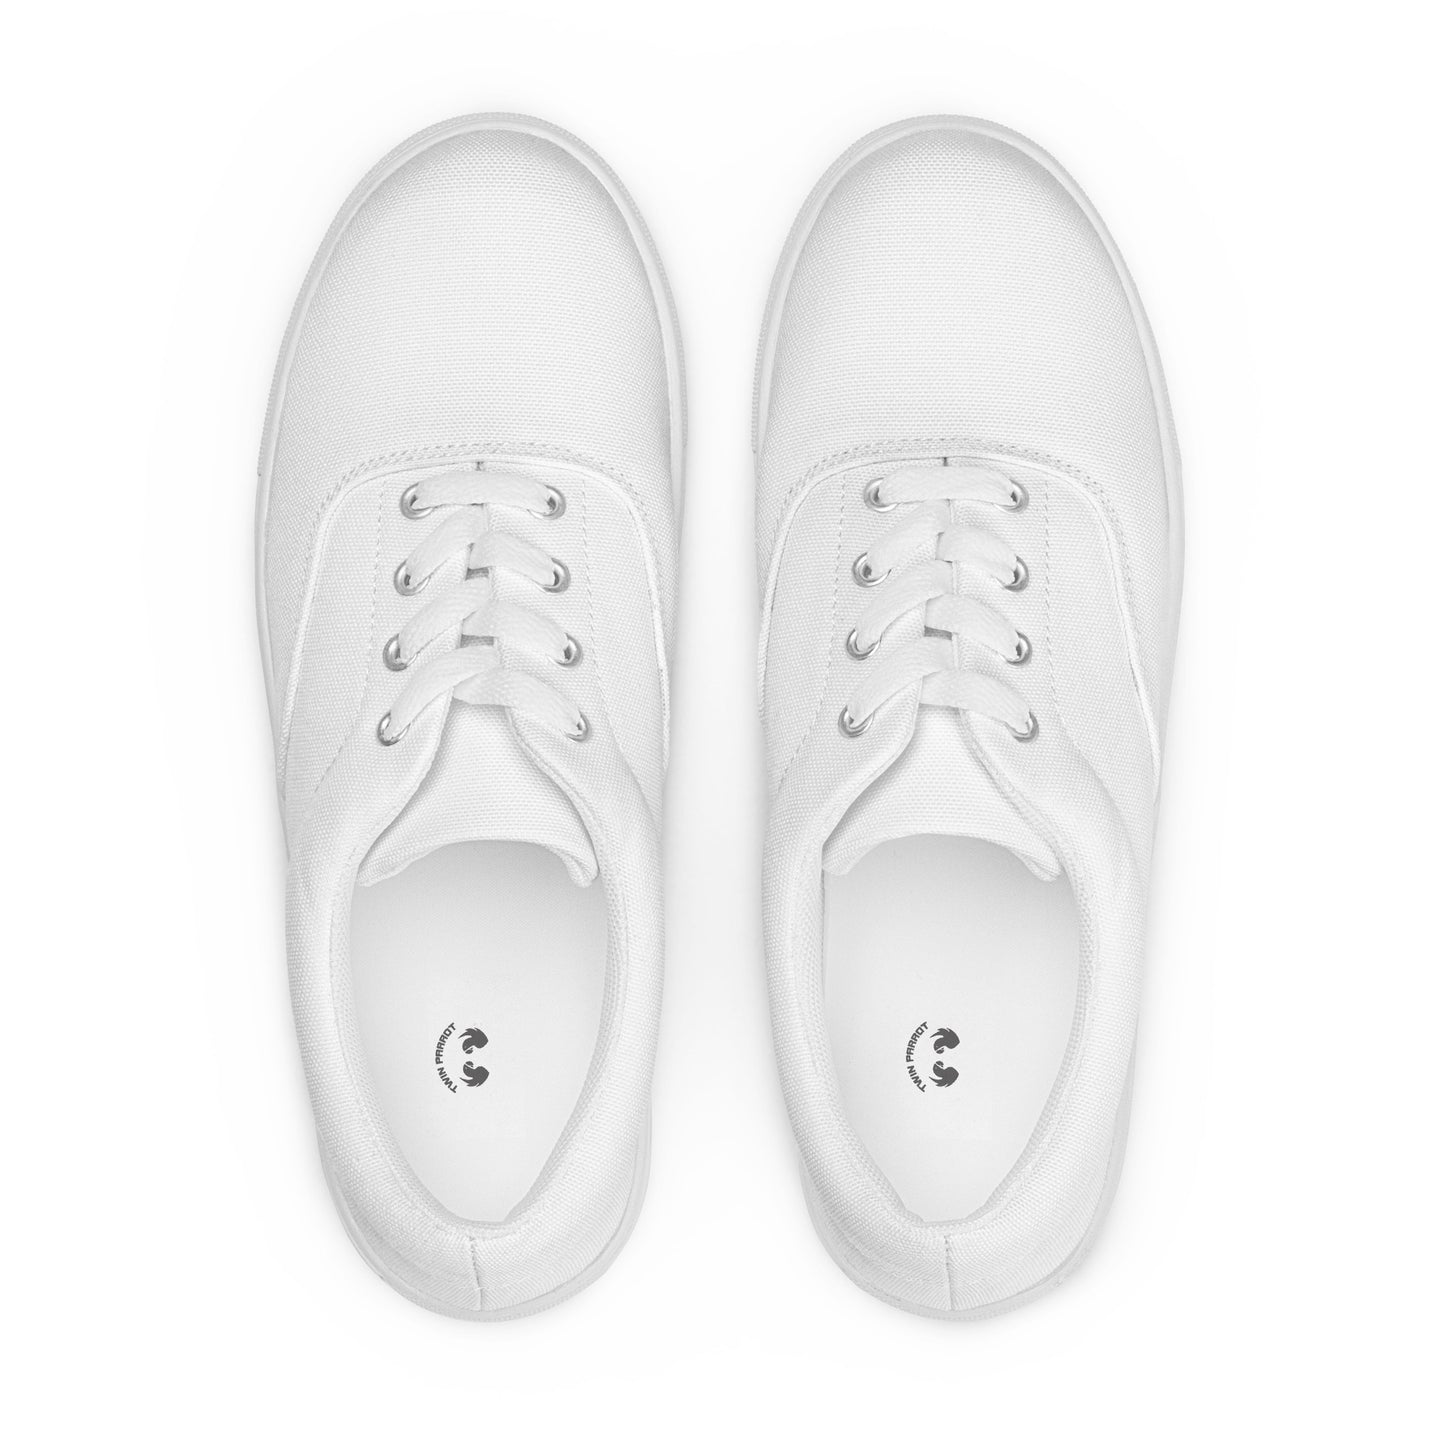 Cloudwalkers: Men's Breathable Lace-Up Canvas Sneakers for All-Day Comfort